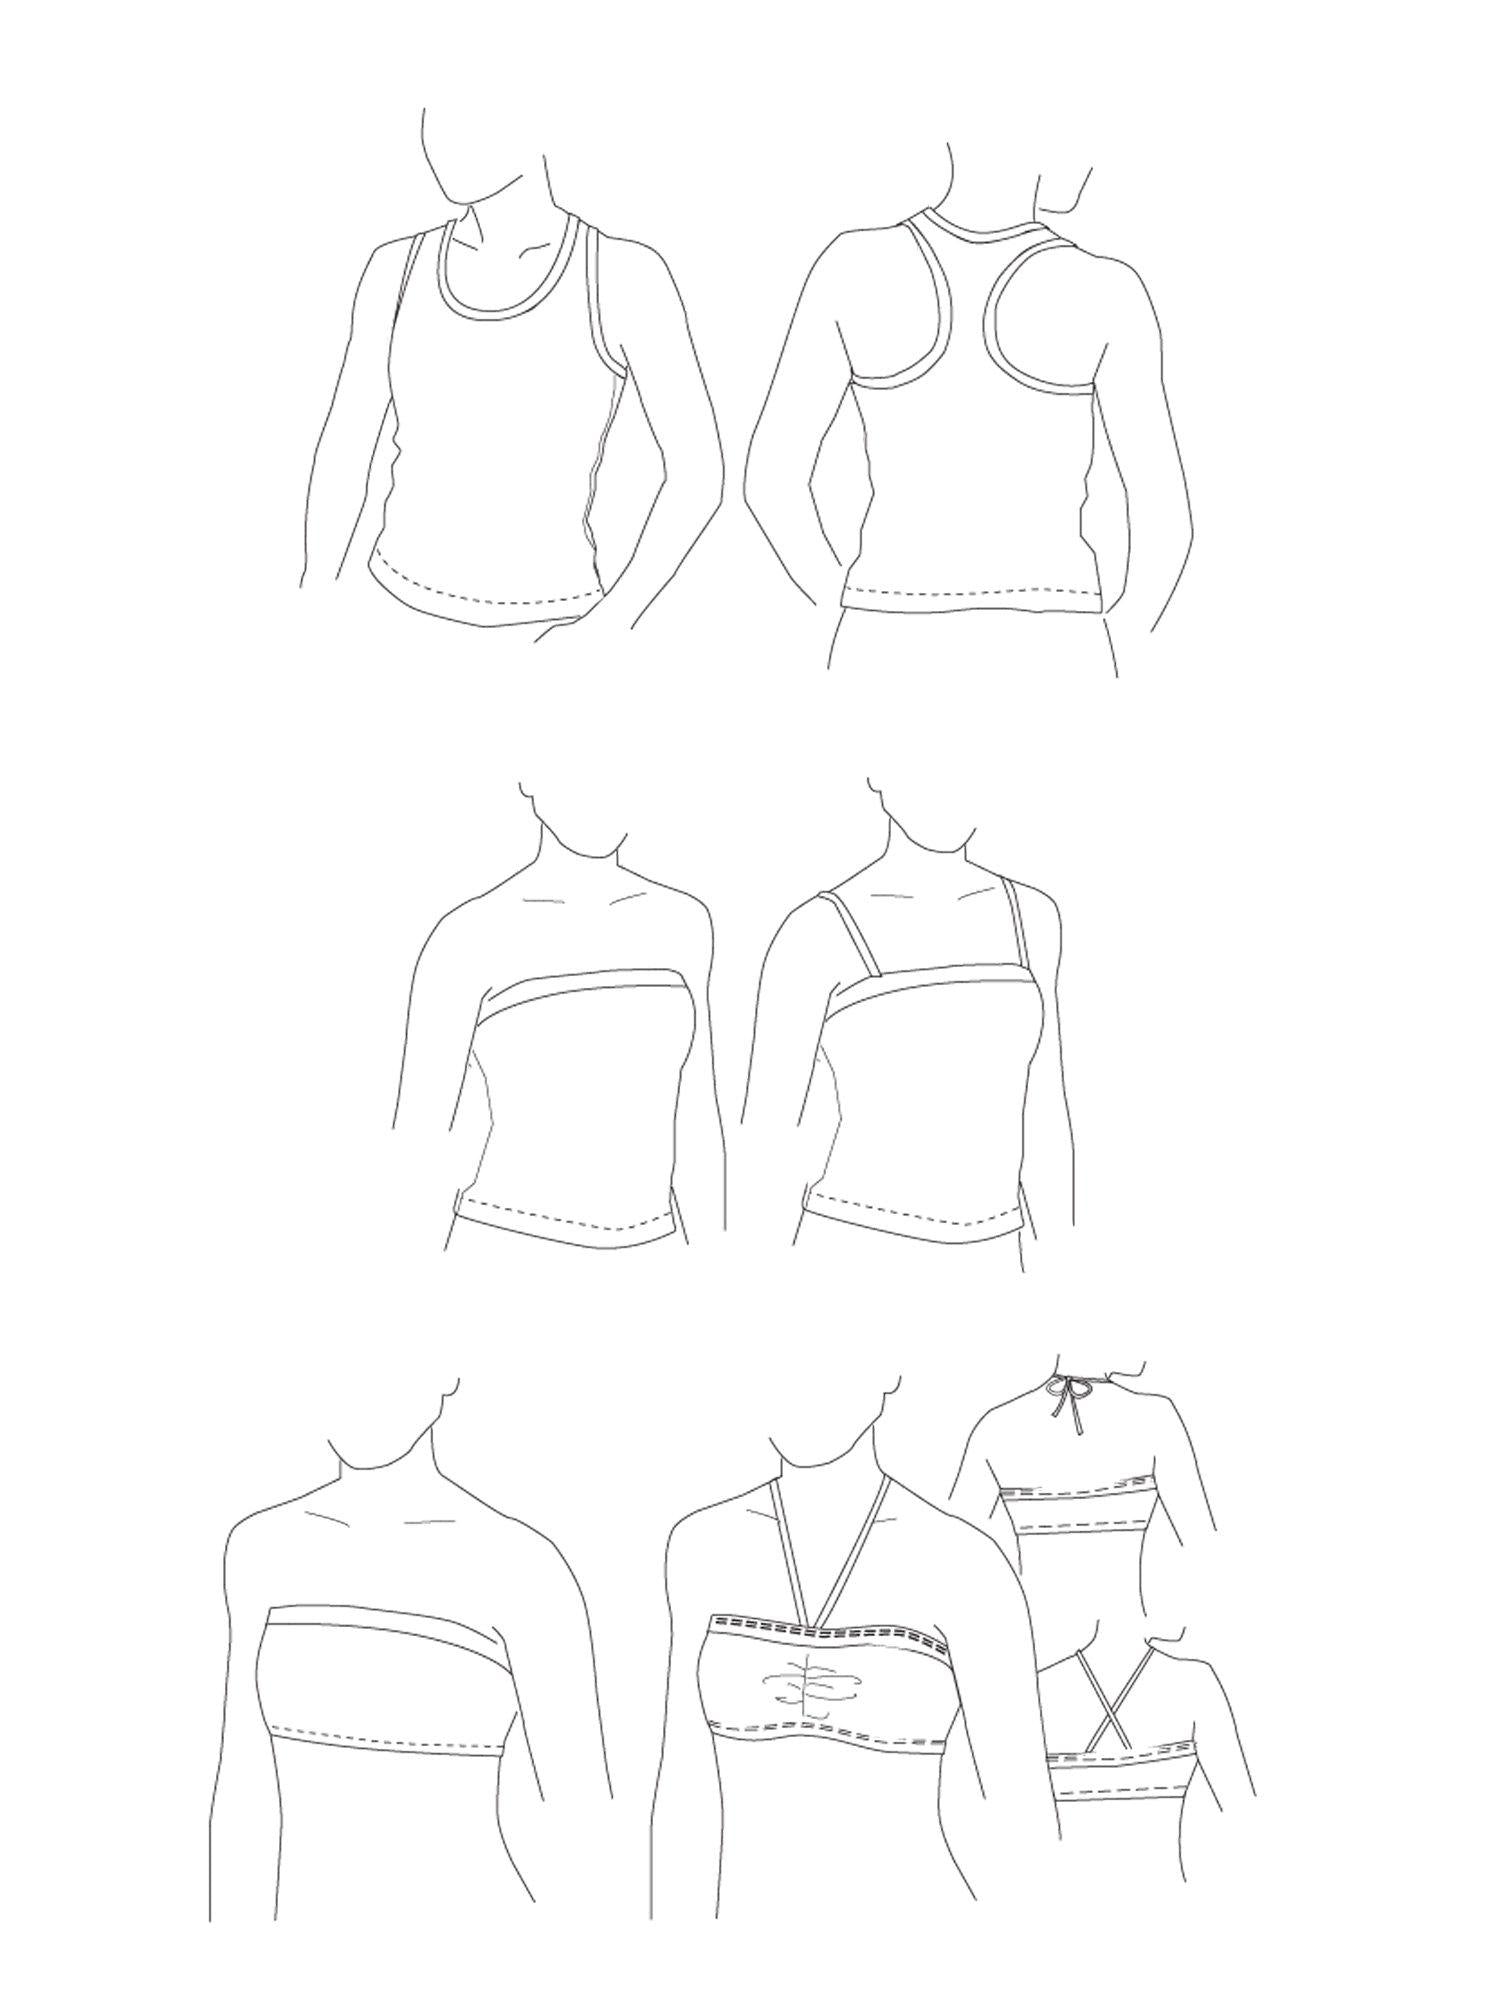 Sew A Cleavage Coverage · How To Make A Strapless Top · How To by saltybkk